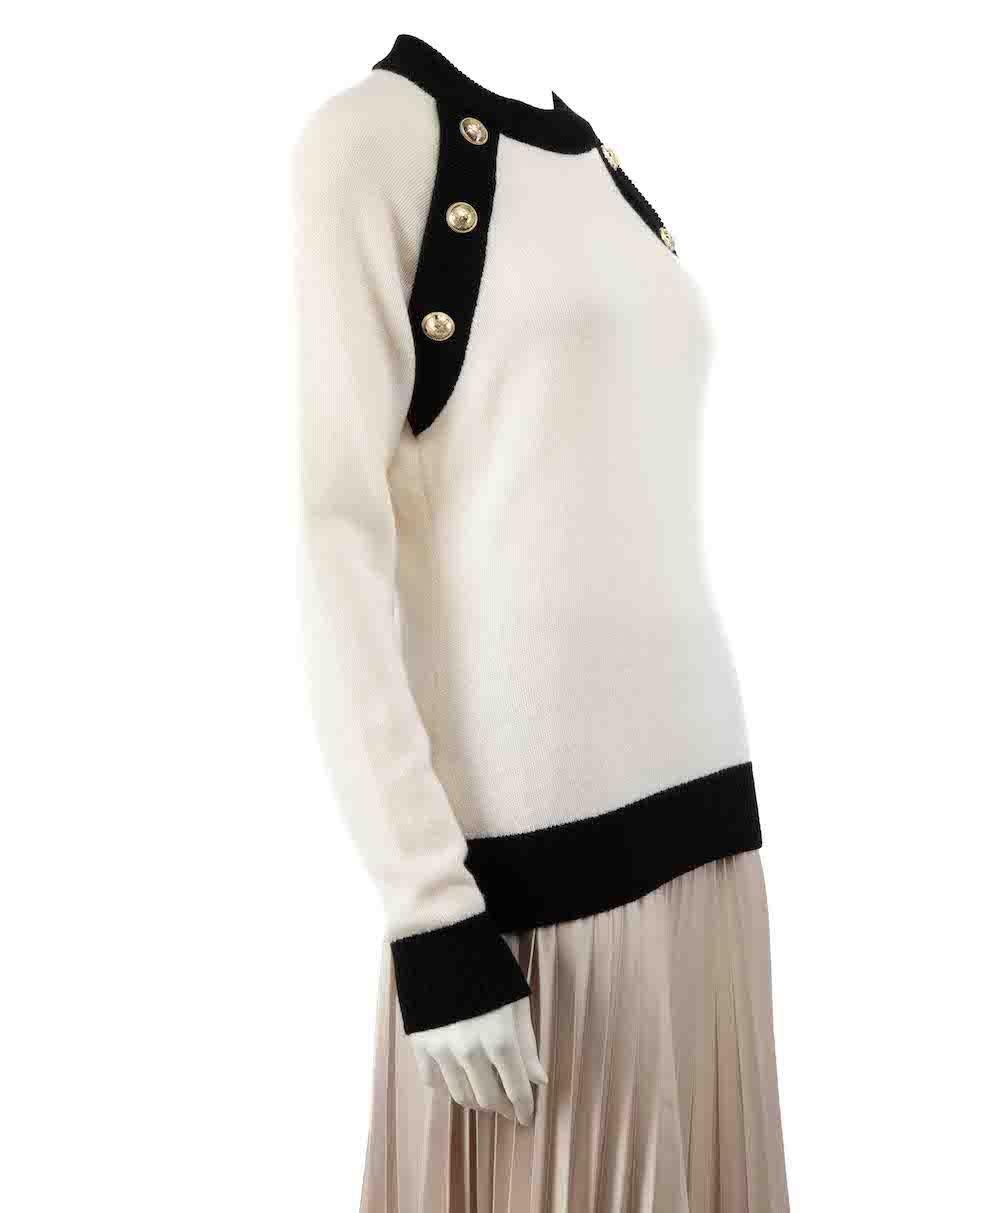 CONDITION is Very good. Minimal wear to jumper is evident. Brand label is partially detached. Minimal wear to the texture with light pilling to the knit on this used Balmain designer resale item.
 
 
 
 Details
 
 
 White
 
 Wool
 
 Knit jumper
 
